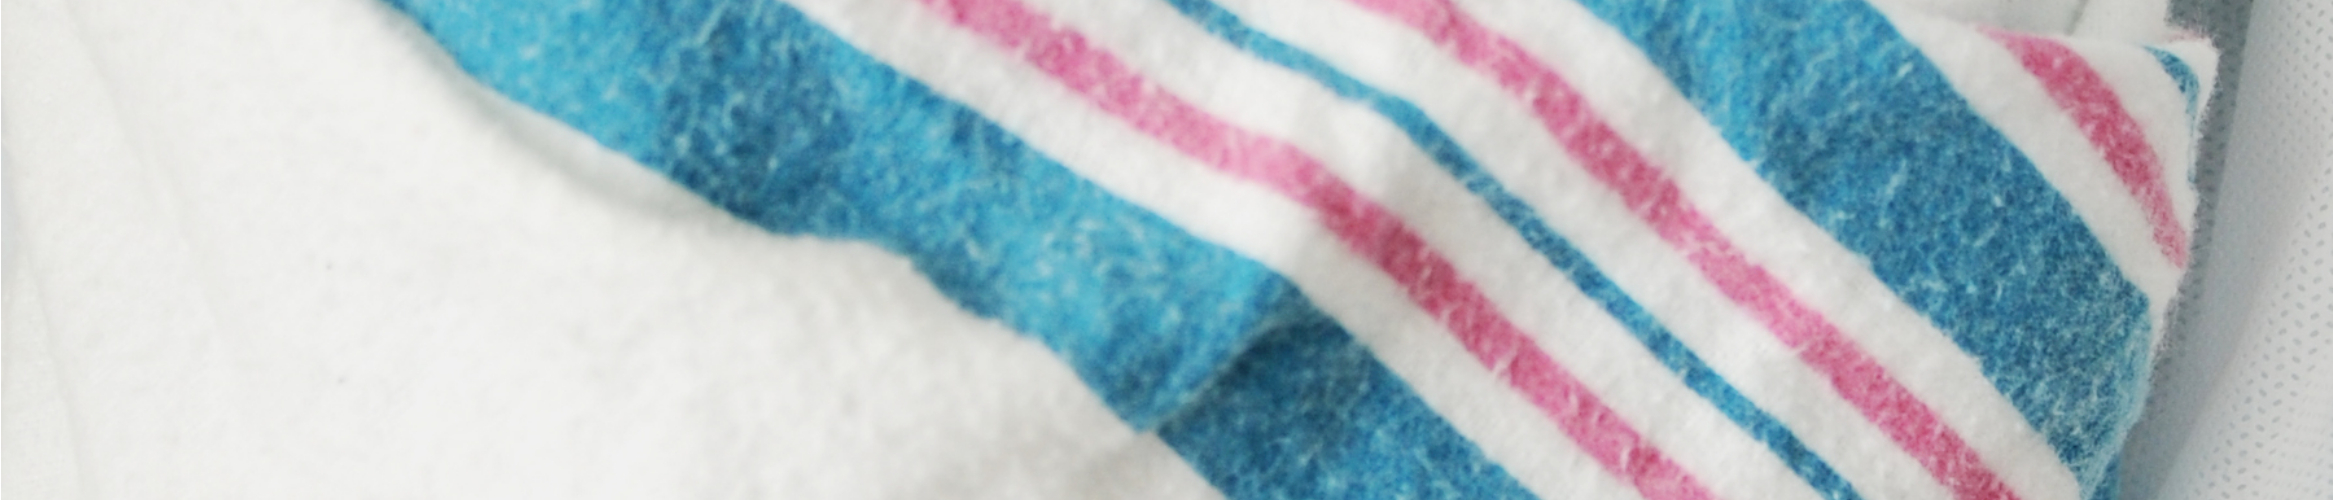 Where Did Those Pink And Blue Striped Baby Blankets Come From